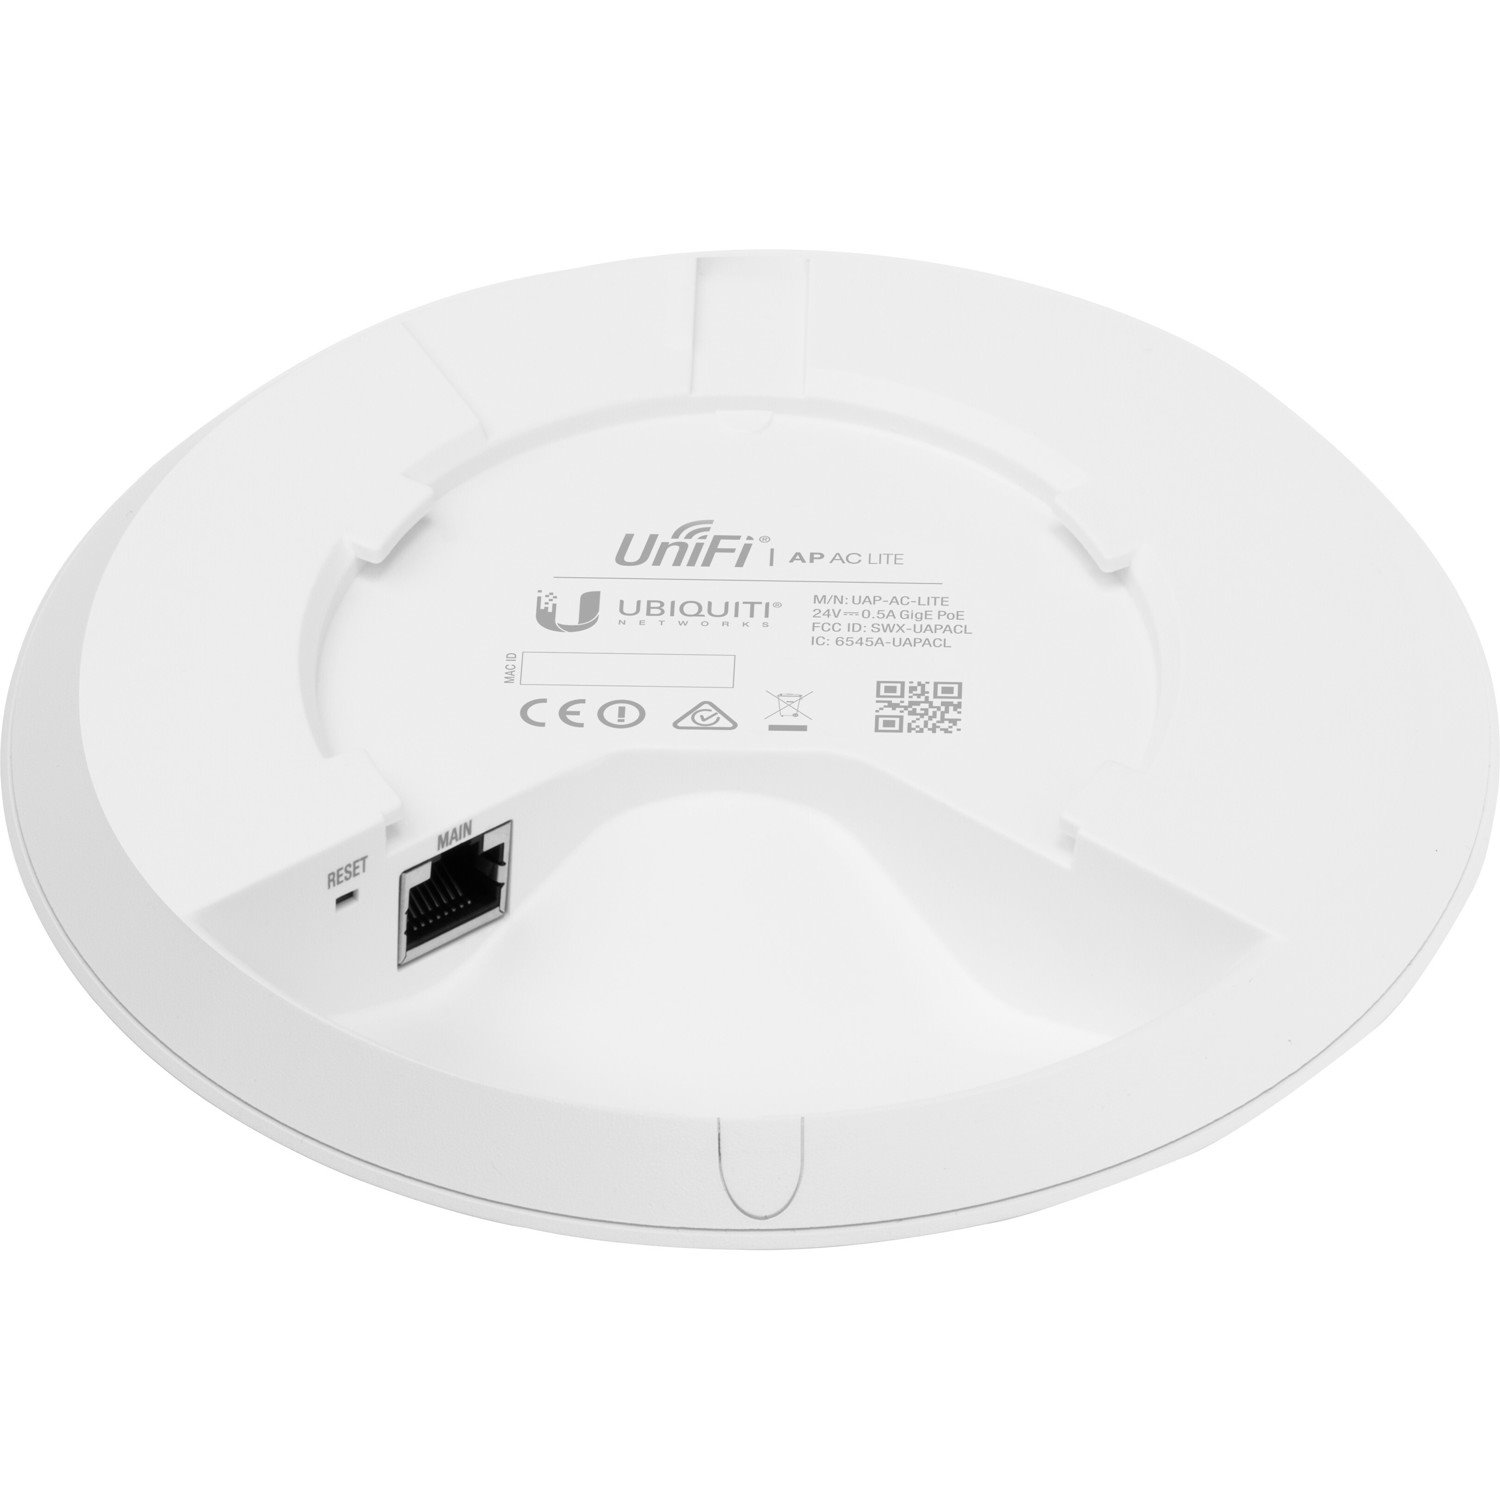 Ubiquiti UniFi Ac Lite 802.11Ac Dual Radio Access Point, 2.4GHz @ 300Mbps, 5GHz @ 867Mbps, 1167Mbps Total, Range Up To 122M